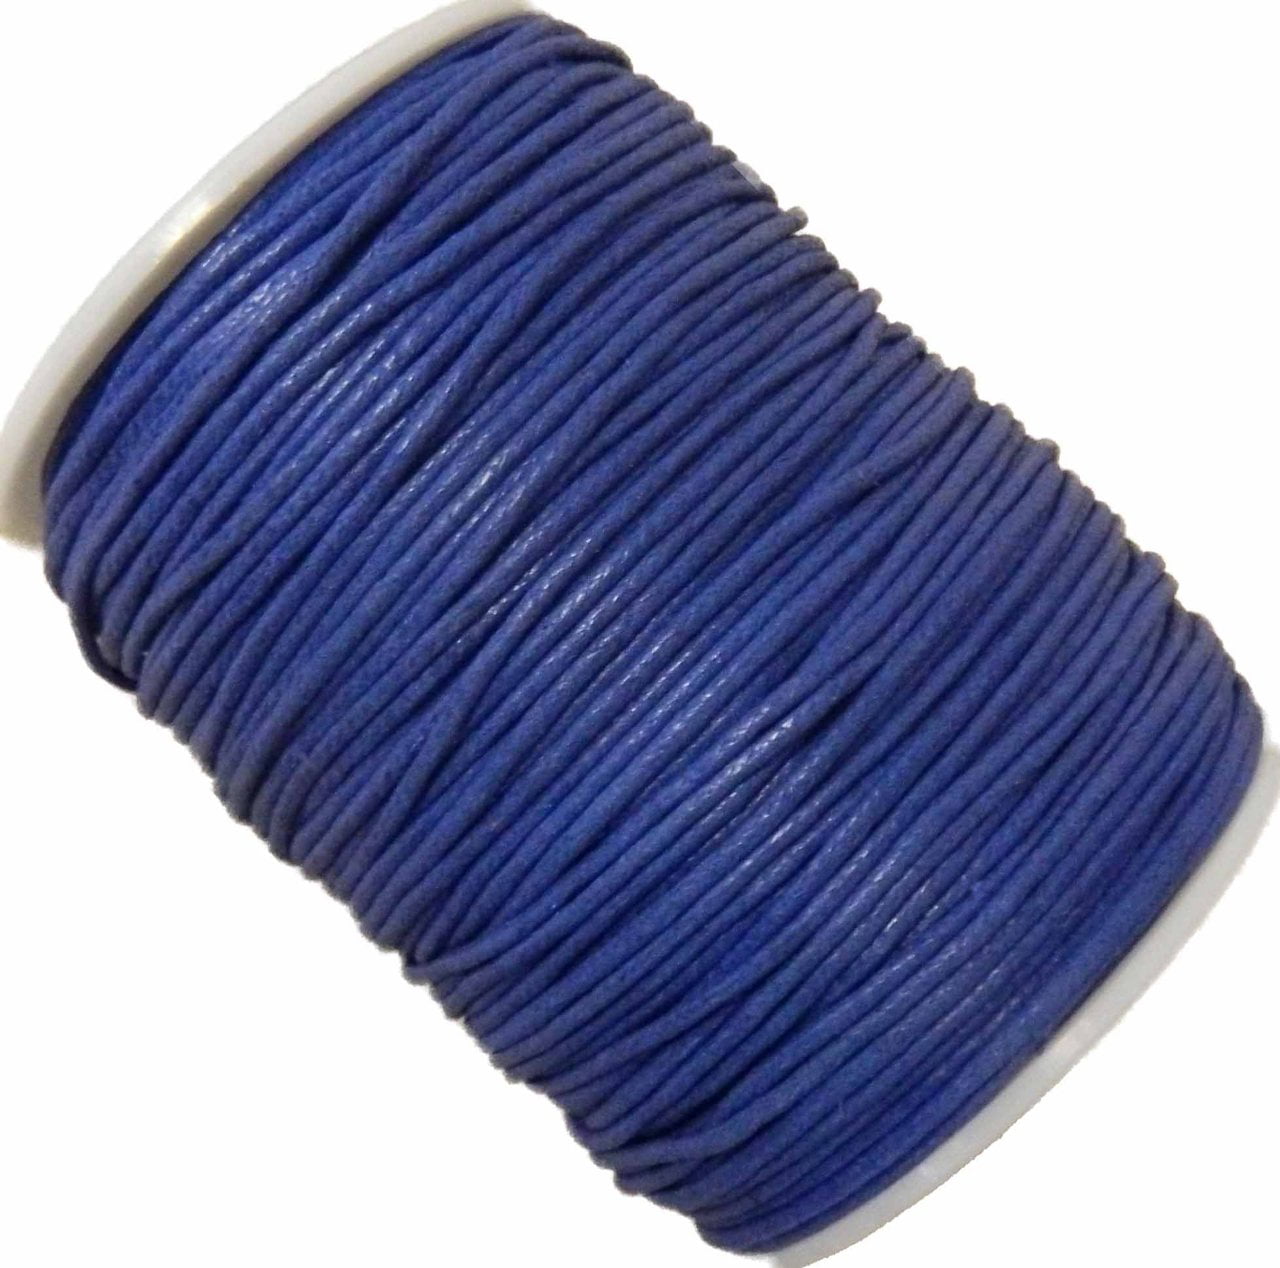 Anyasen Waxed Cotton Cord Rope 12 Rolls Craft Waxed Thread Jewellery Cord Waxed Cotton Cord Thread 1MM for DIY Jewellery Making Bracelets Beading